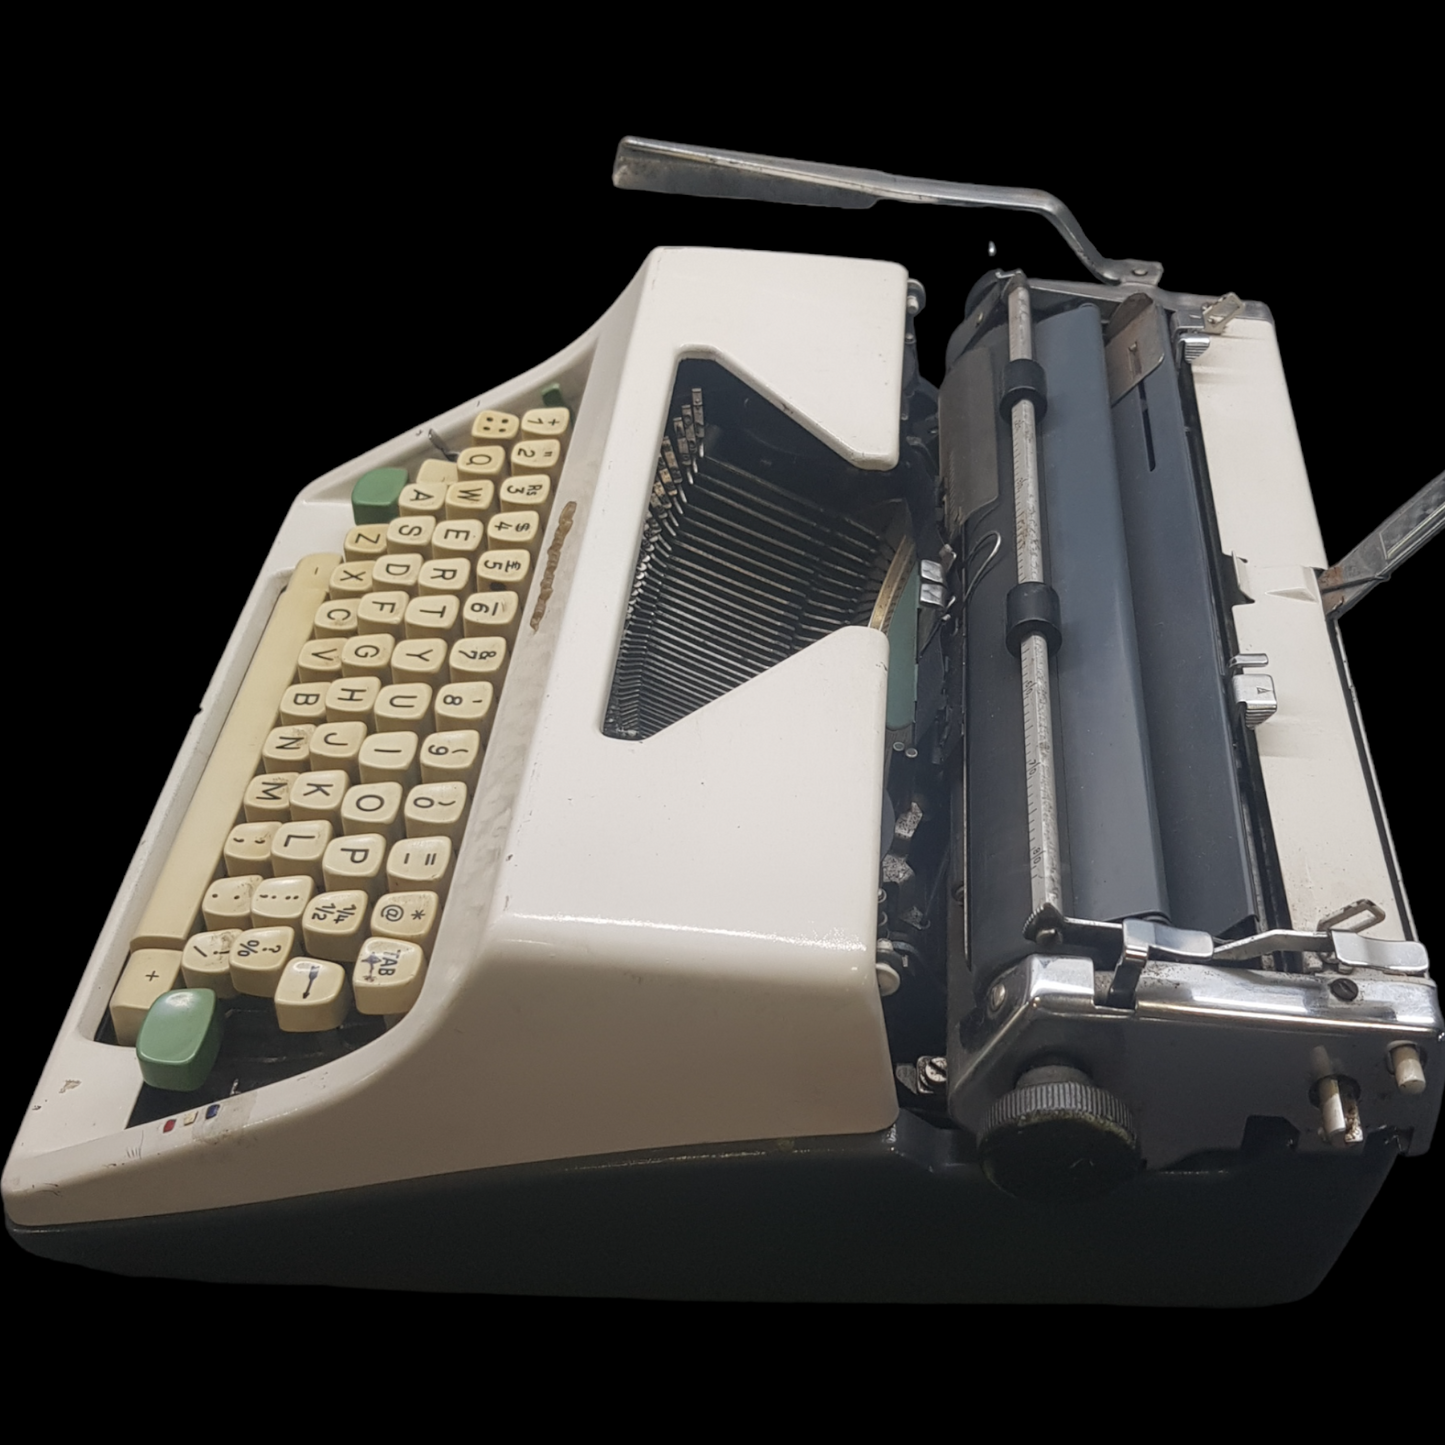 Image of Olympia SM Model Typewriter. Big Portable Typewriter. . Made in Germany. Available from universaltypewritercompany.in.